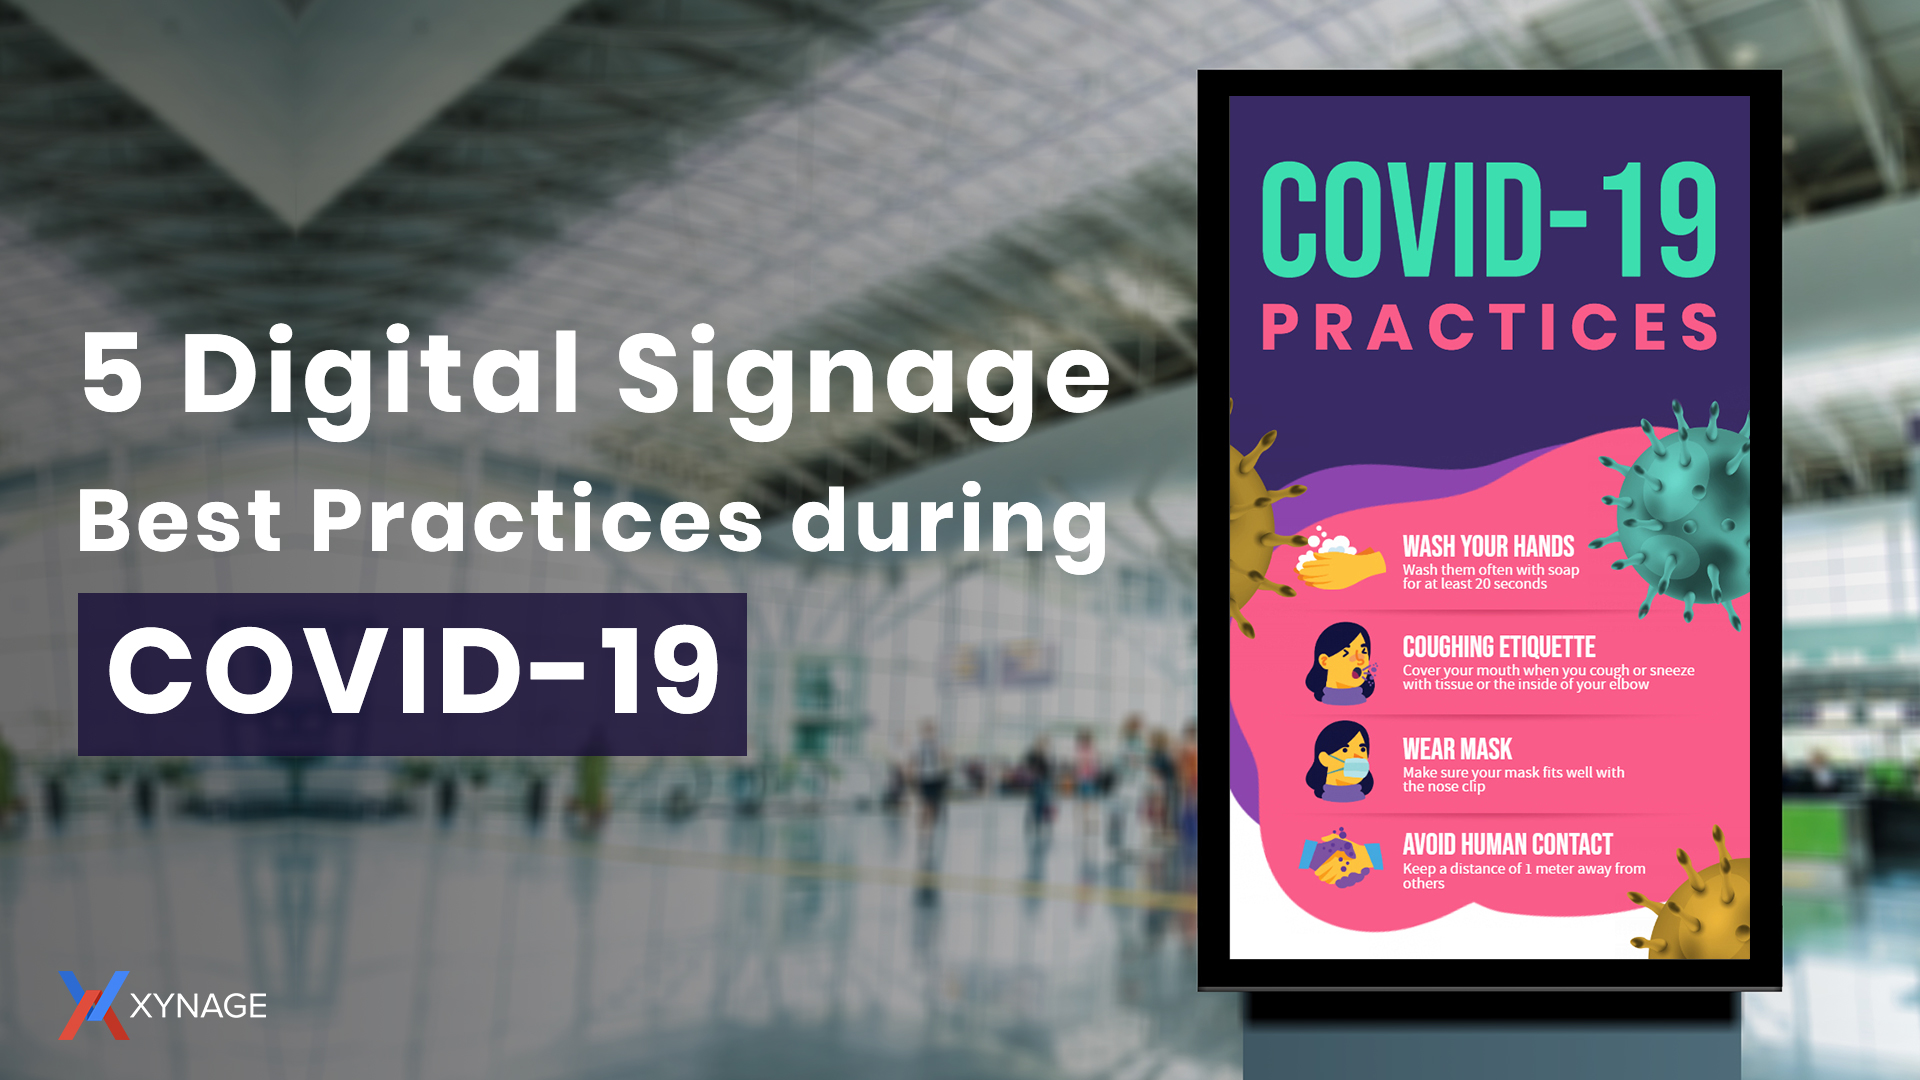 5 Digital Signage Best Practices during COVID-19